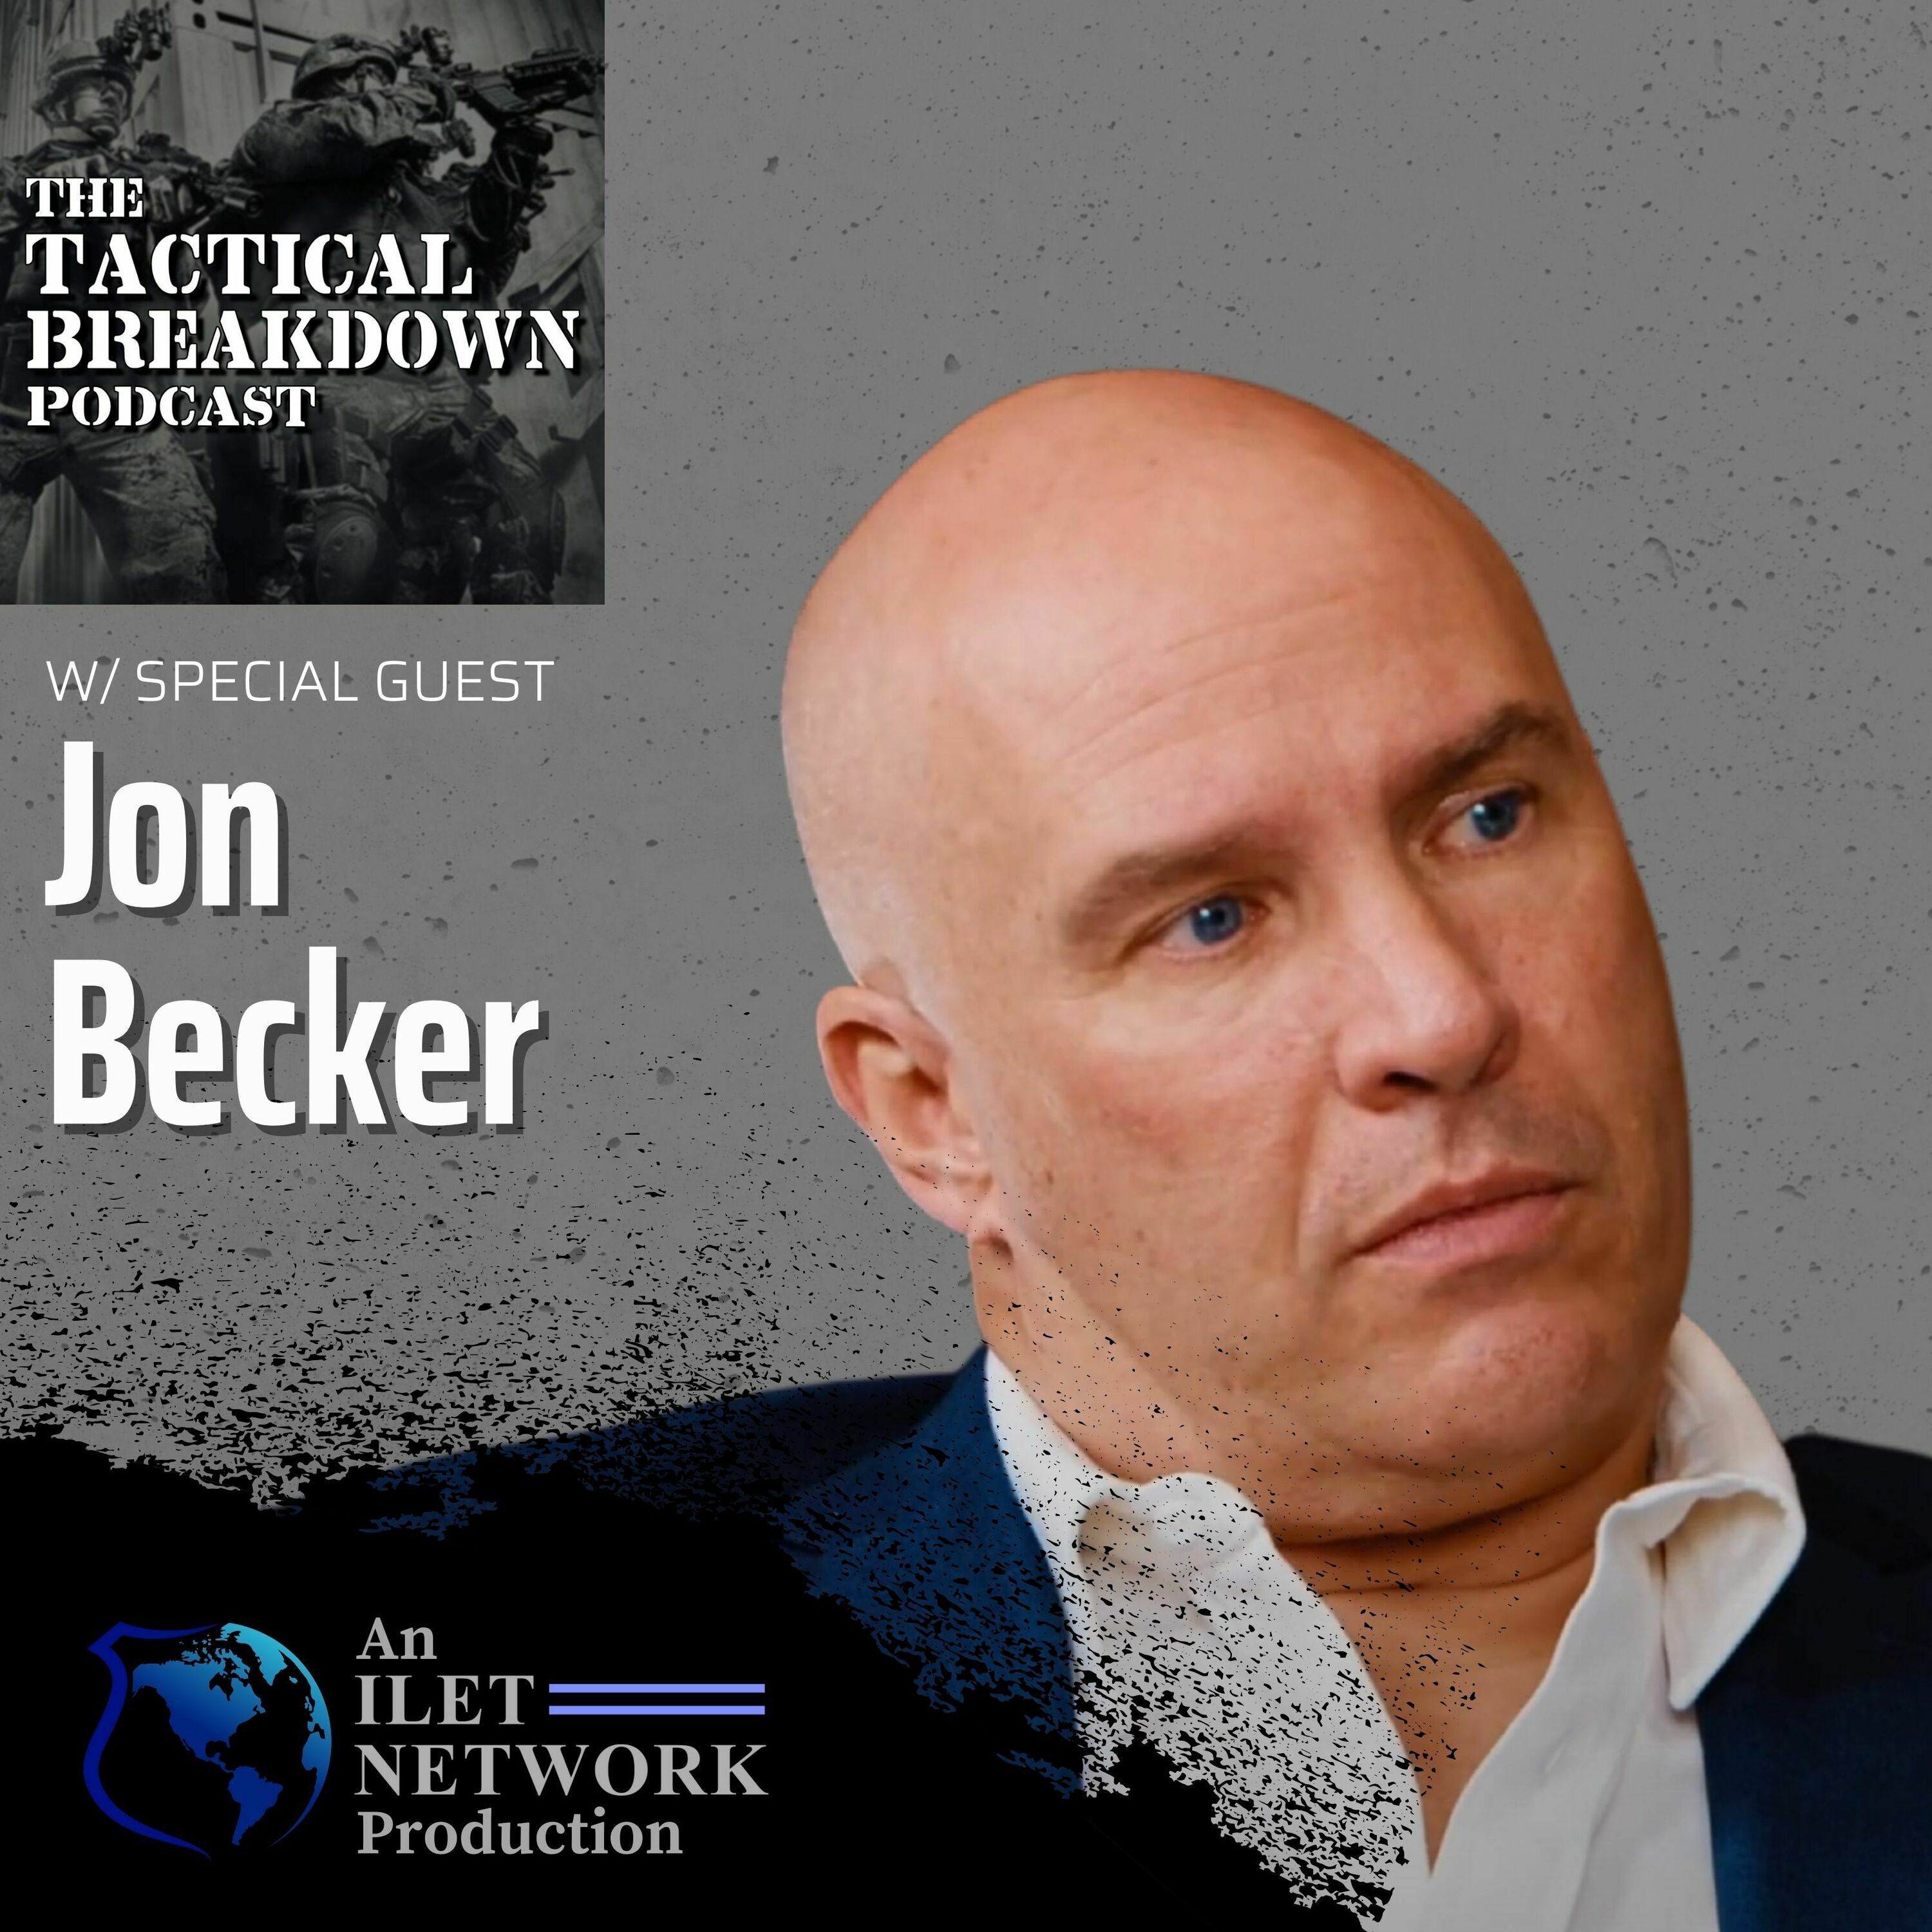 Jon Becker: The Mind Behind The Debrief | A New Podcast for Tactical Operations Image